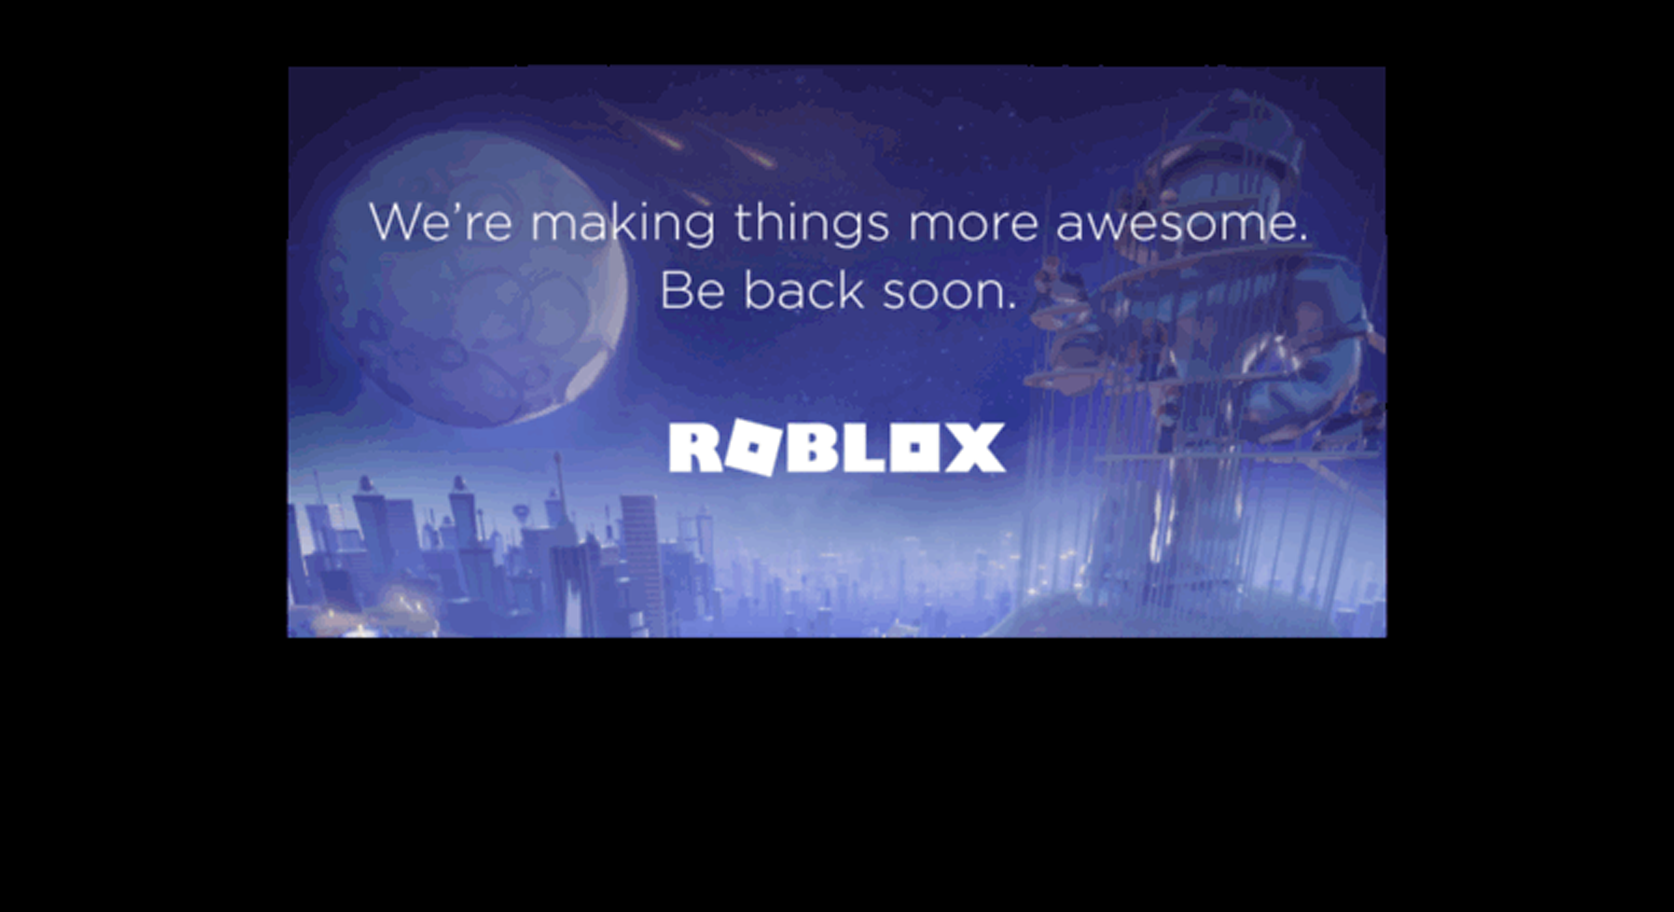 Pov: ROBLOX is down and this is how the wiki acts